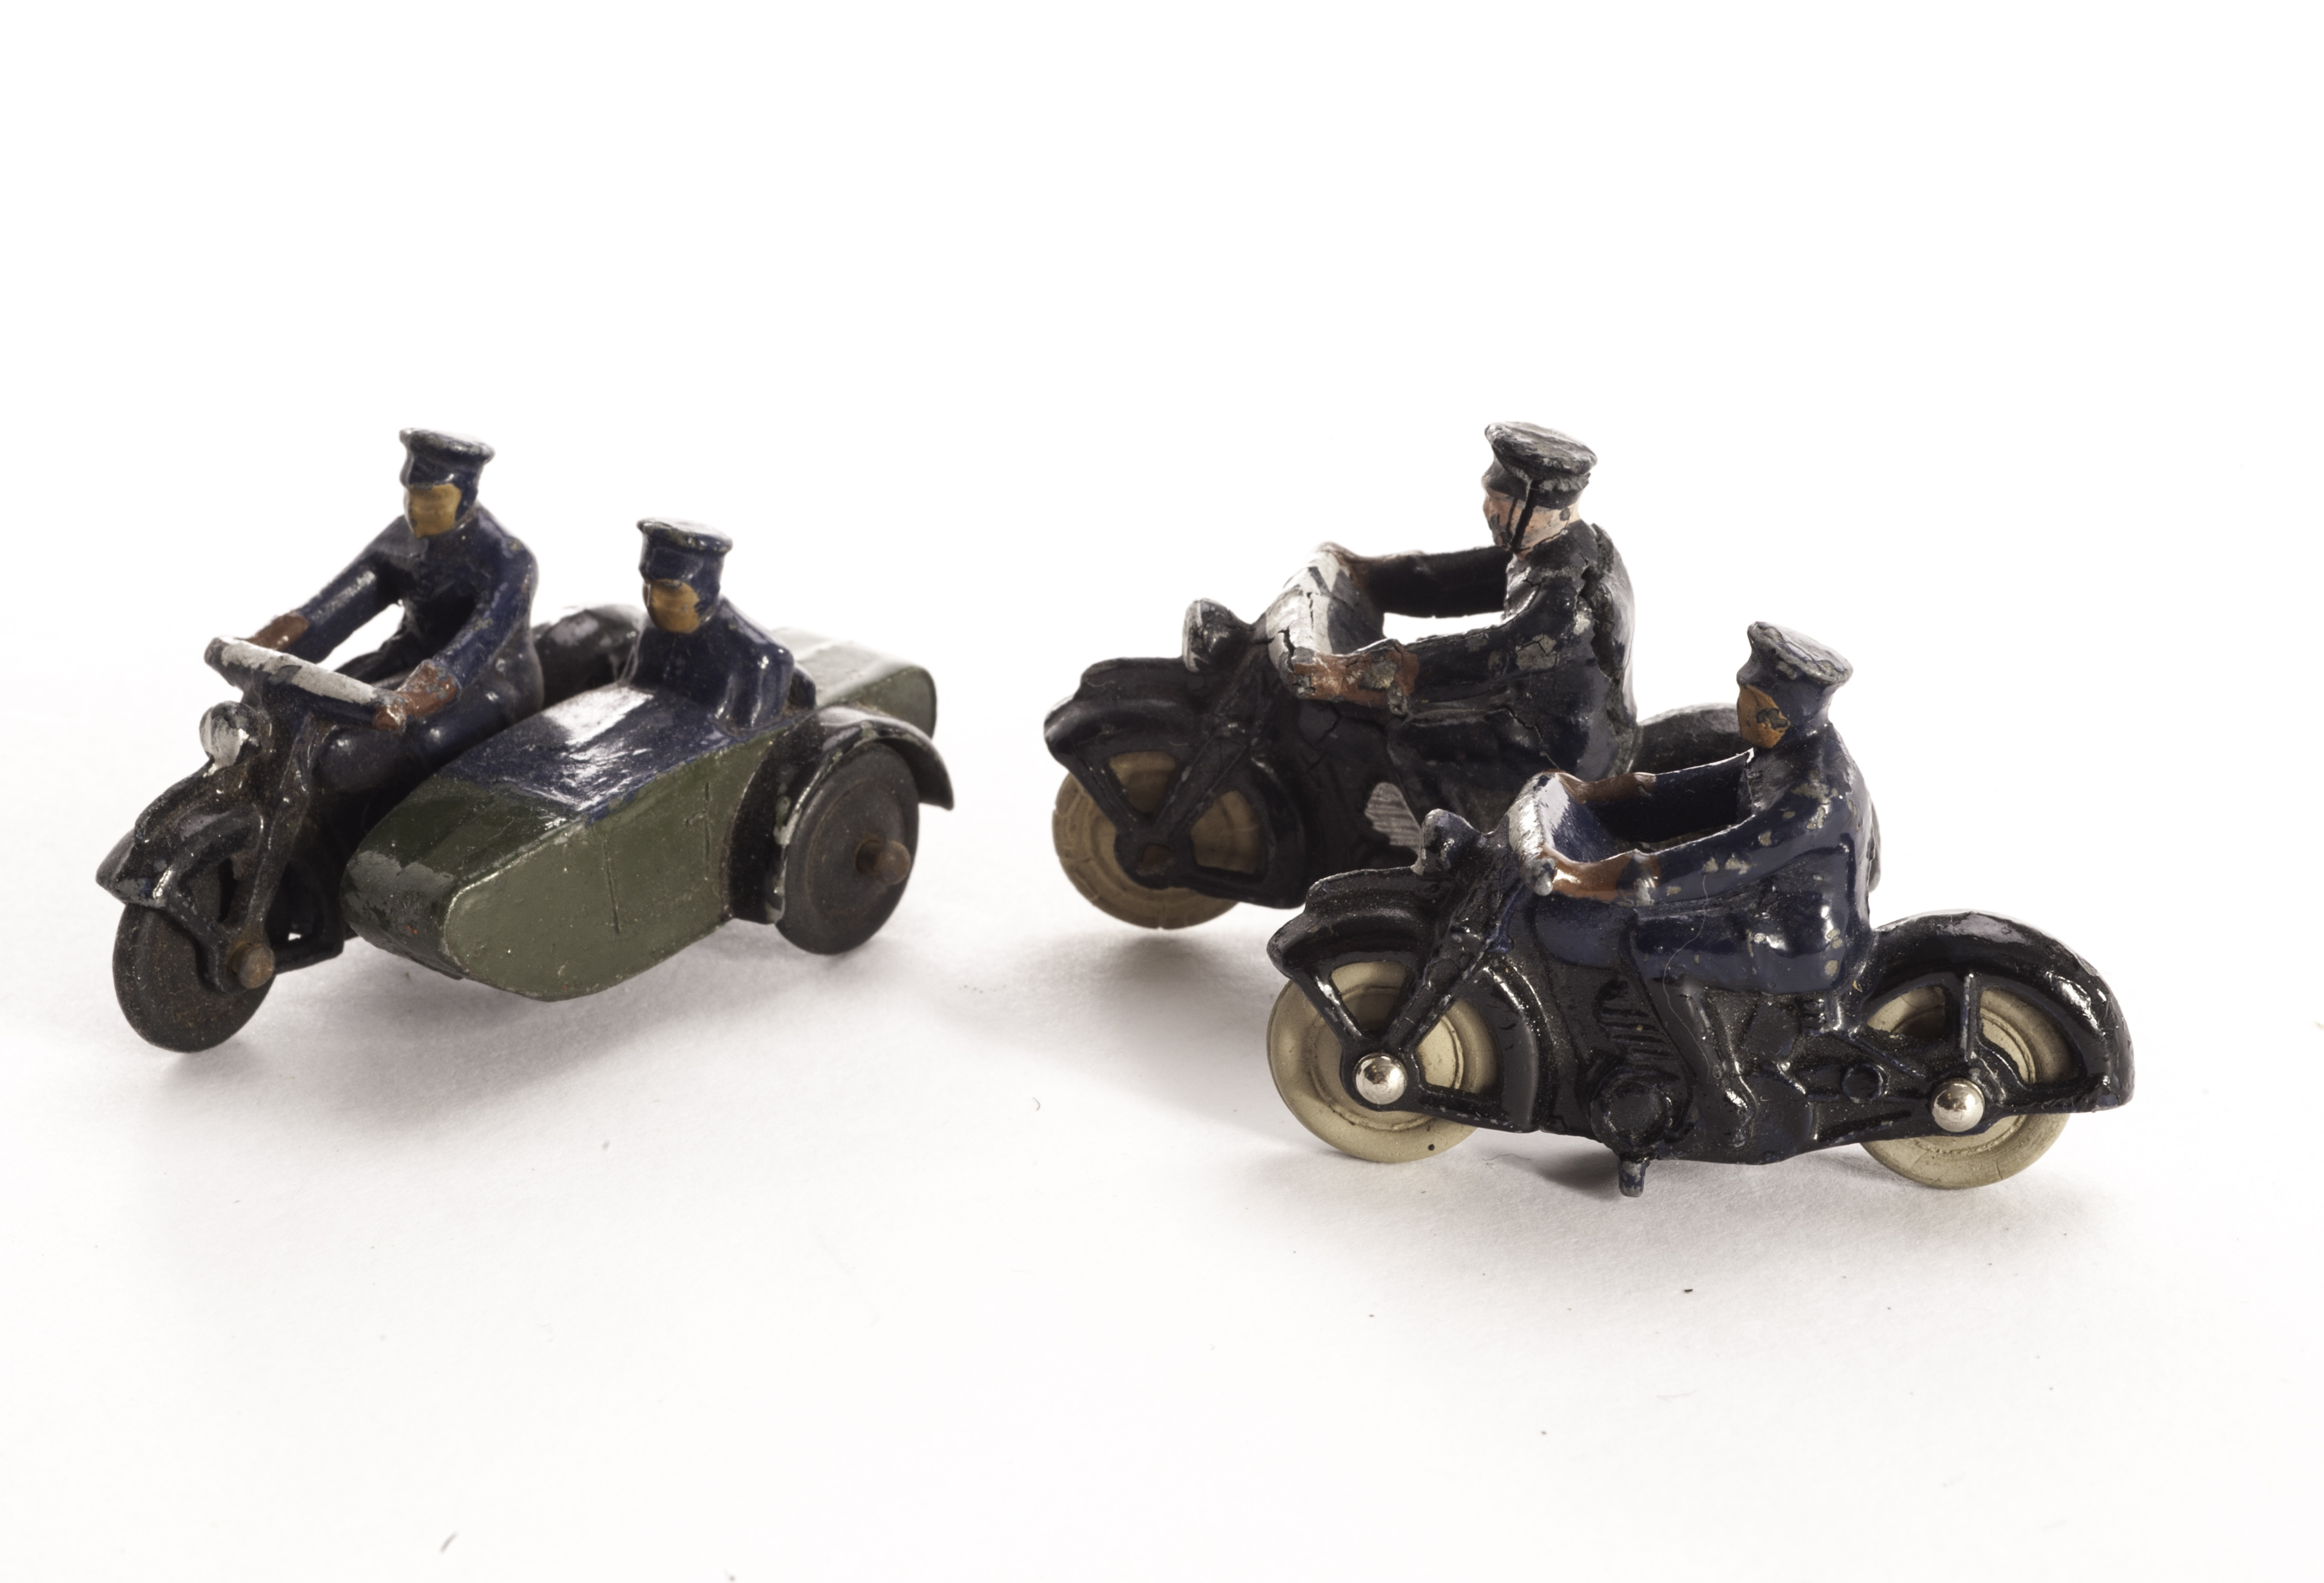 A Pre-War Dinky Toys No. 37b Police Motorcyclist, P-F, fatigue throughout, post-war example with